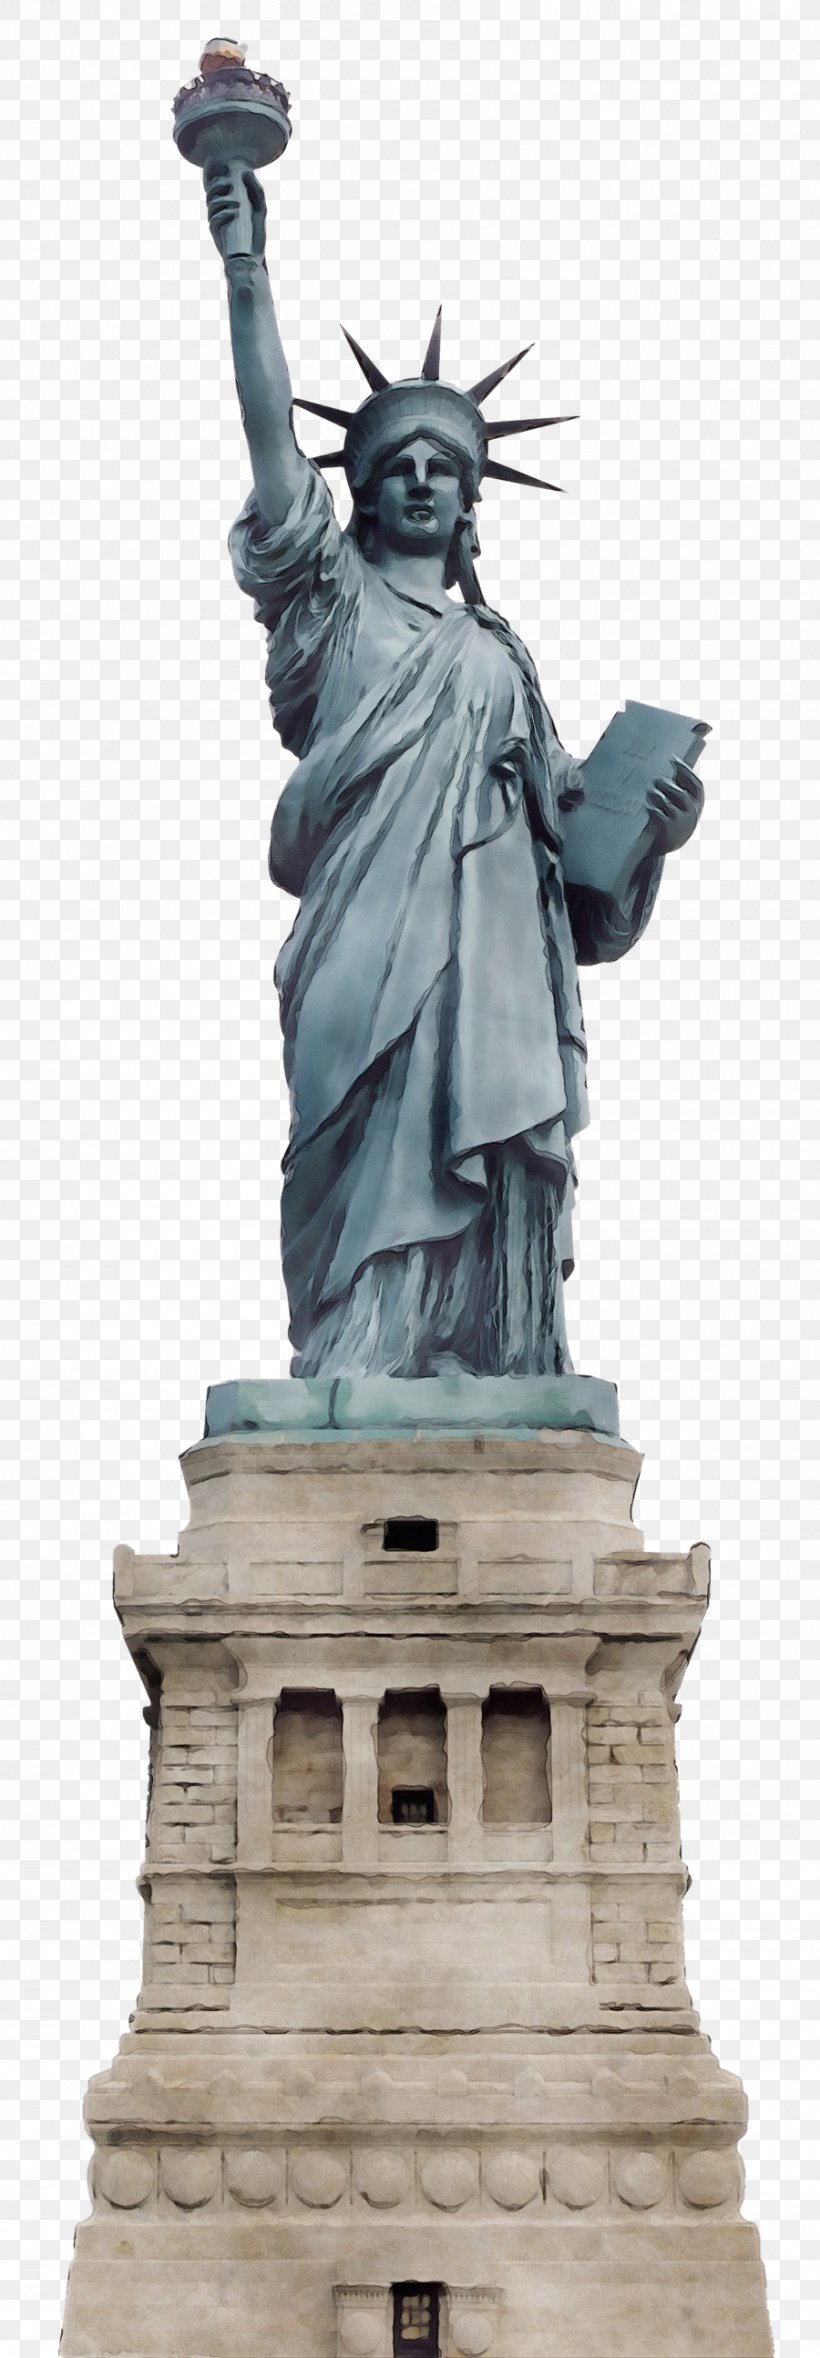 Statue Of Liberty, PNG, 900x2589px, Statue Of Liberty National Monument, Architecture, Carving, Classical Architecture, Classical Sculpture Download Free